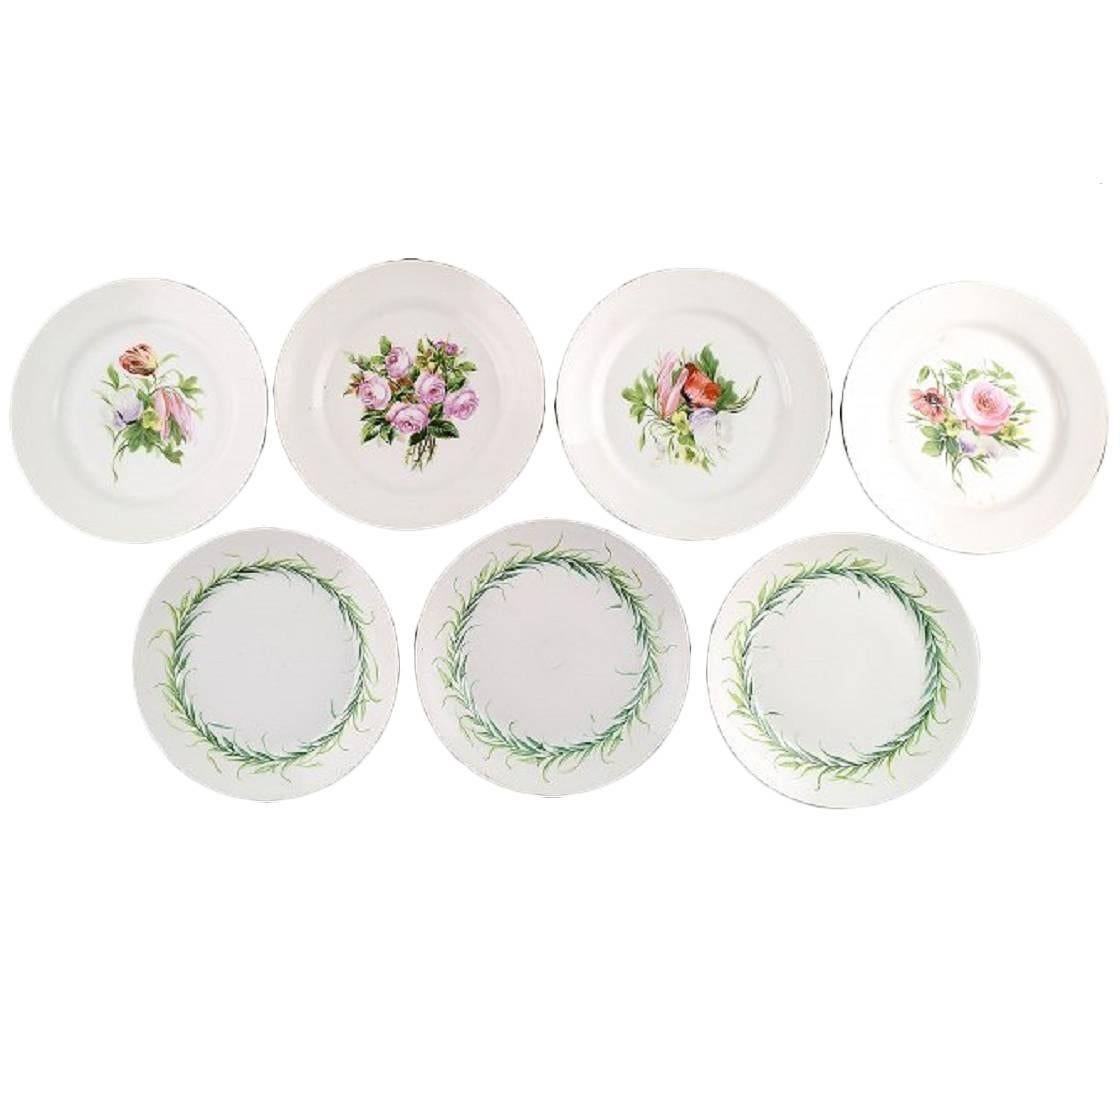 Seven Antique B&G Bing & Grondahl Plates Decorated with Flowers, circa 1870